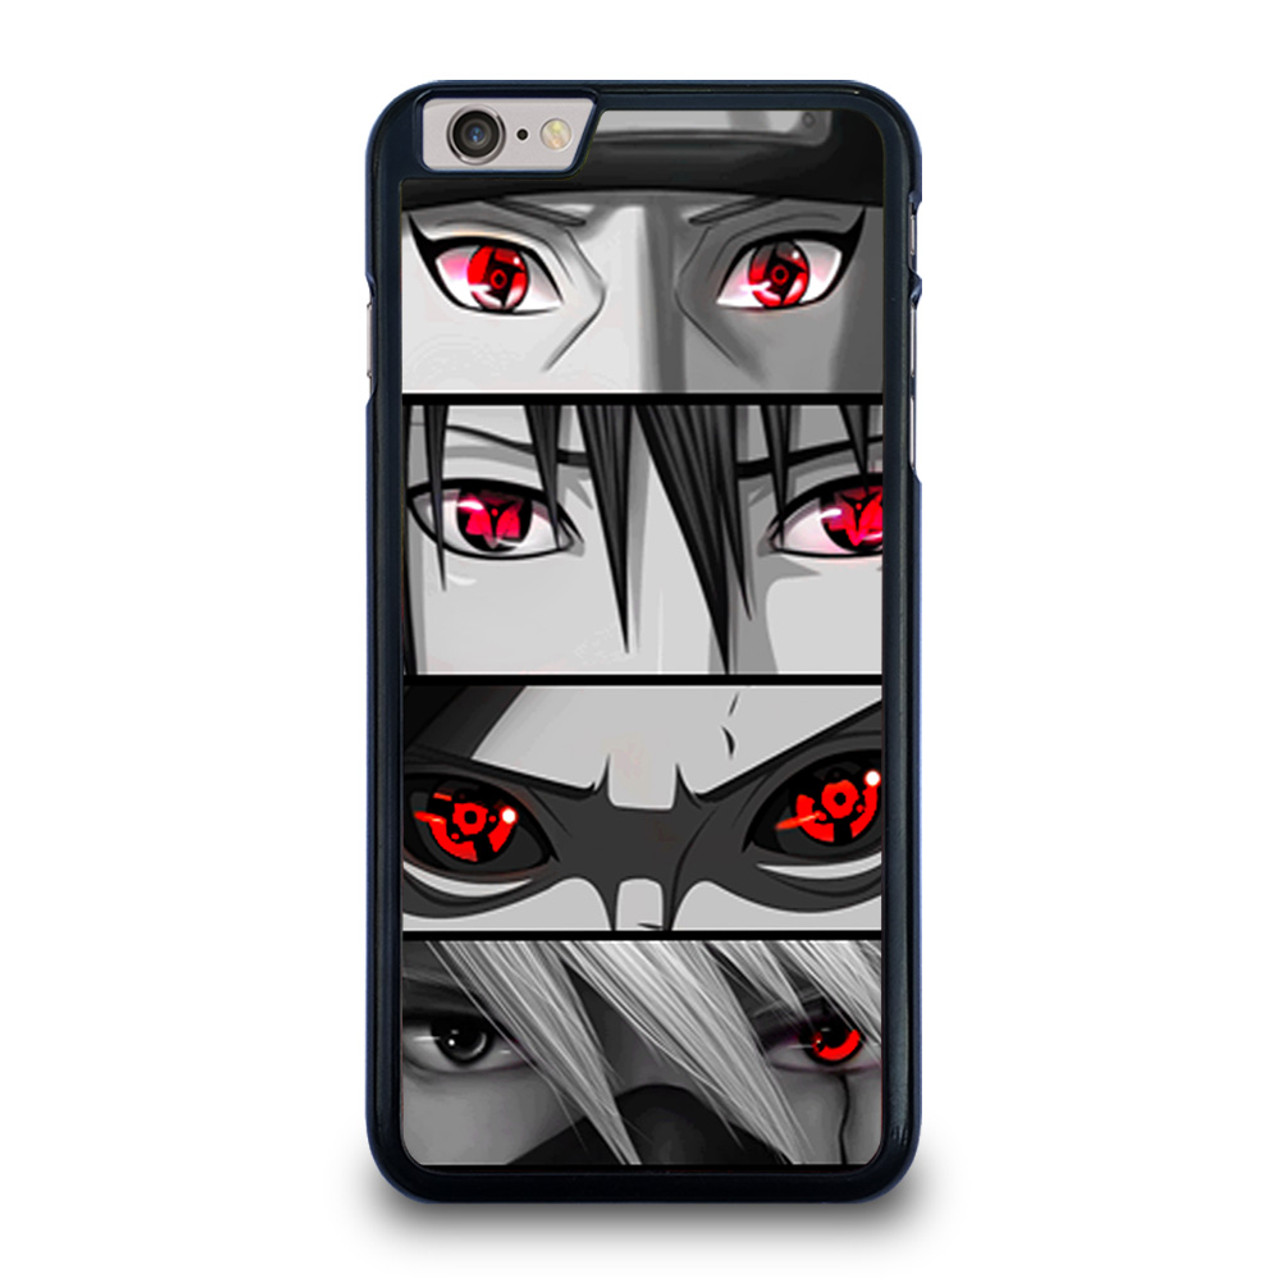 PLAY FAST APPLE iPhone 6 PlusAPPLE iPhone 6s Plus NARUTO SHIPUDDEN  HATAKE ANIME BOY NEON PRINTED BACK COVER